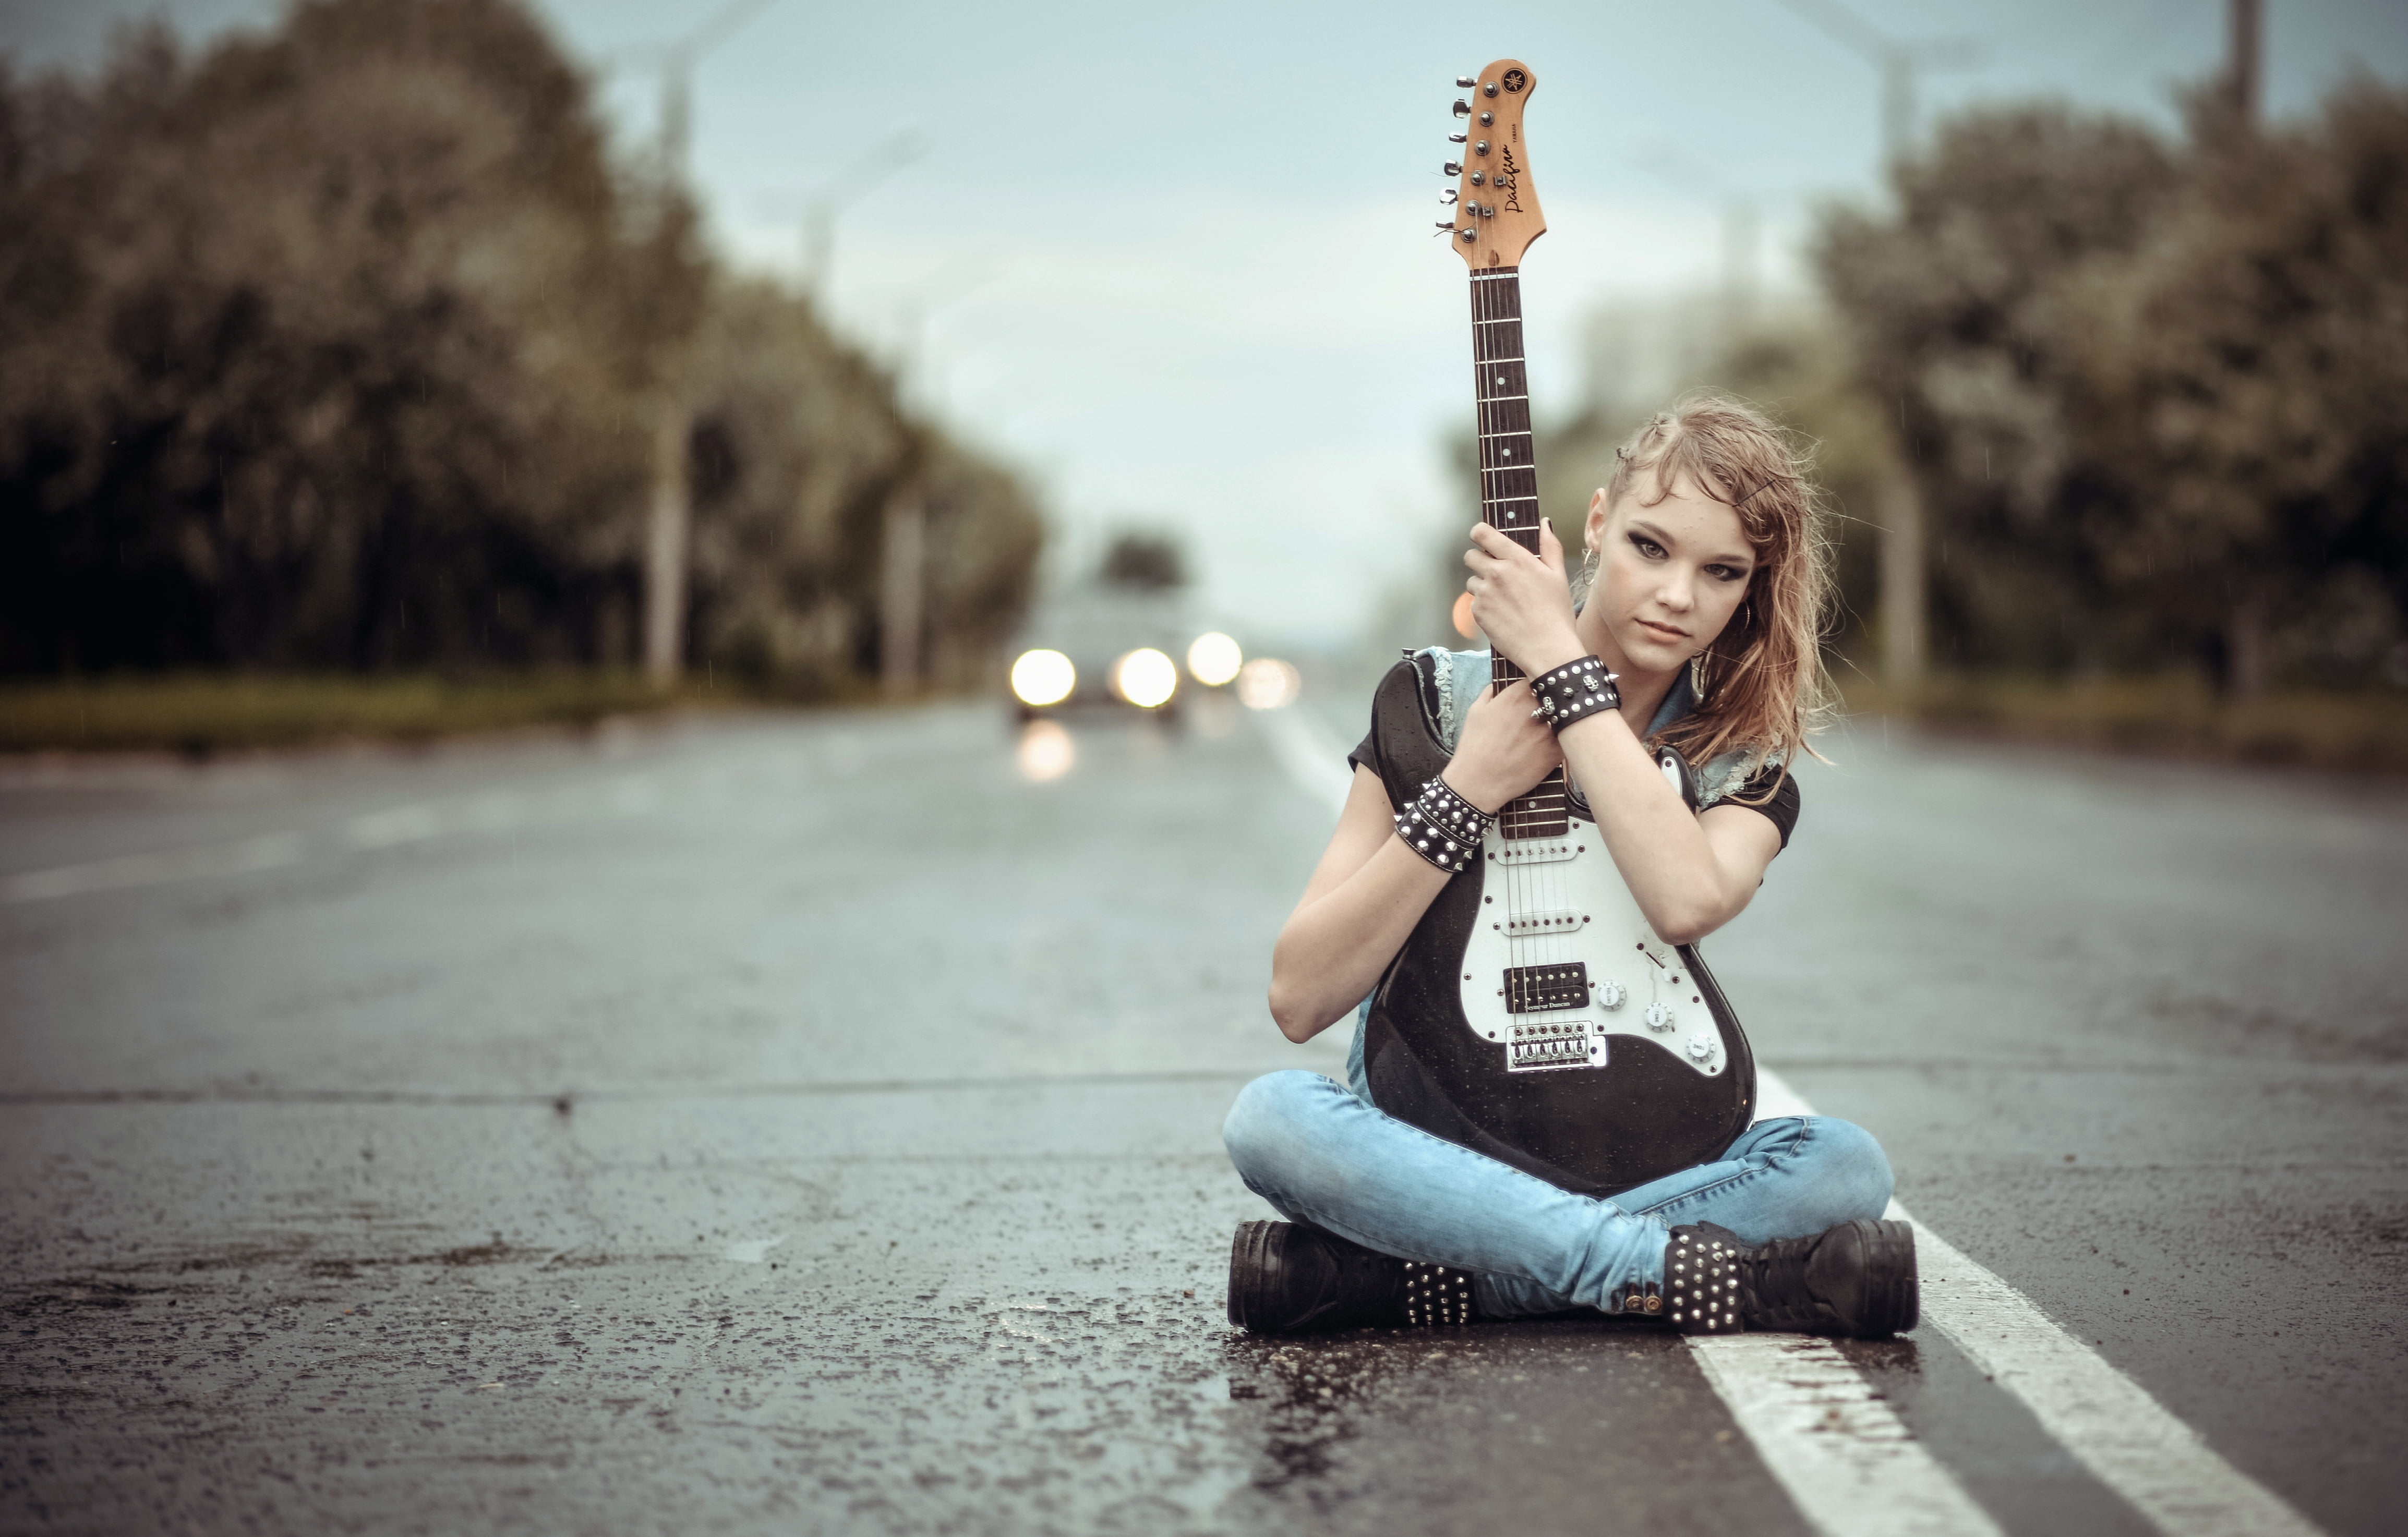 black and white stratocaster electric guitar, road, girl, music